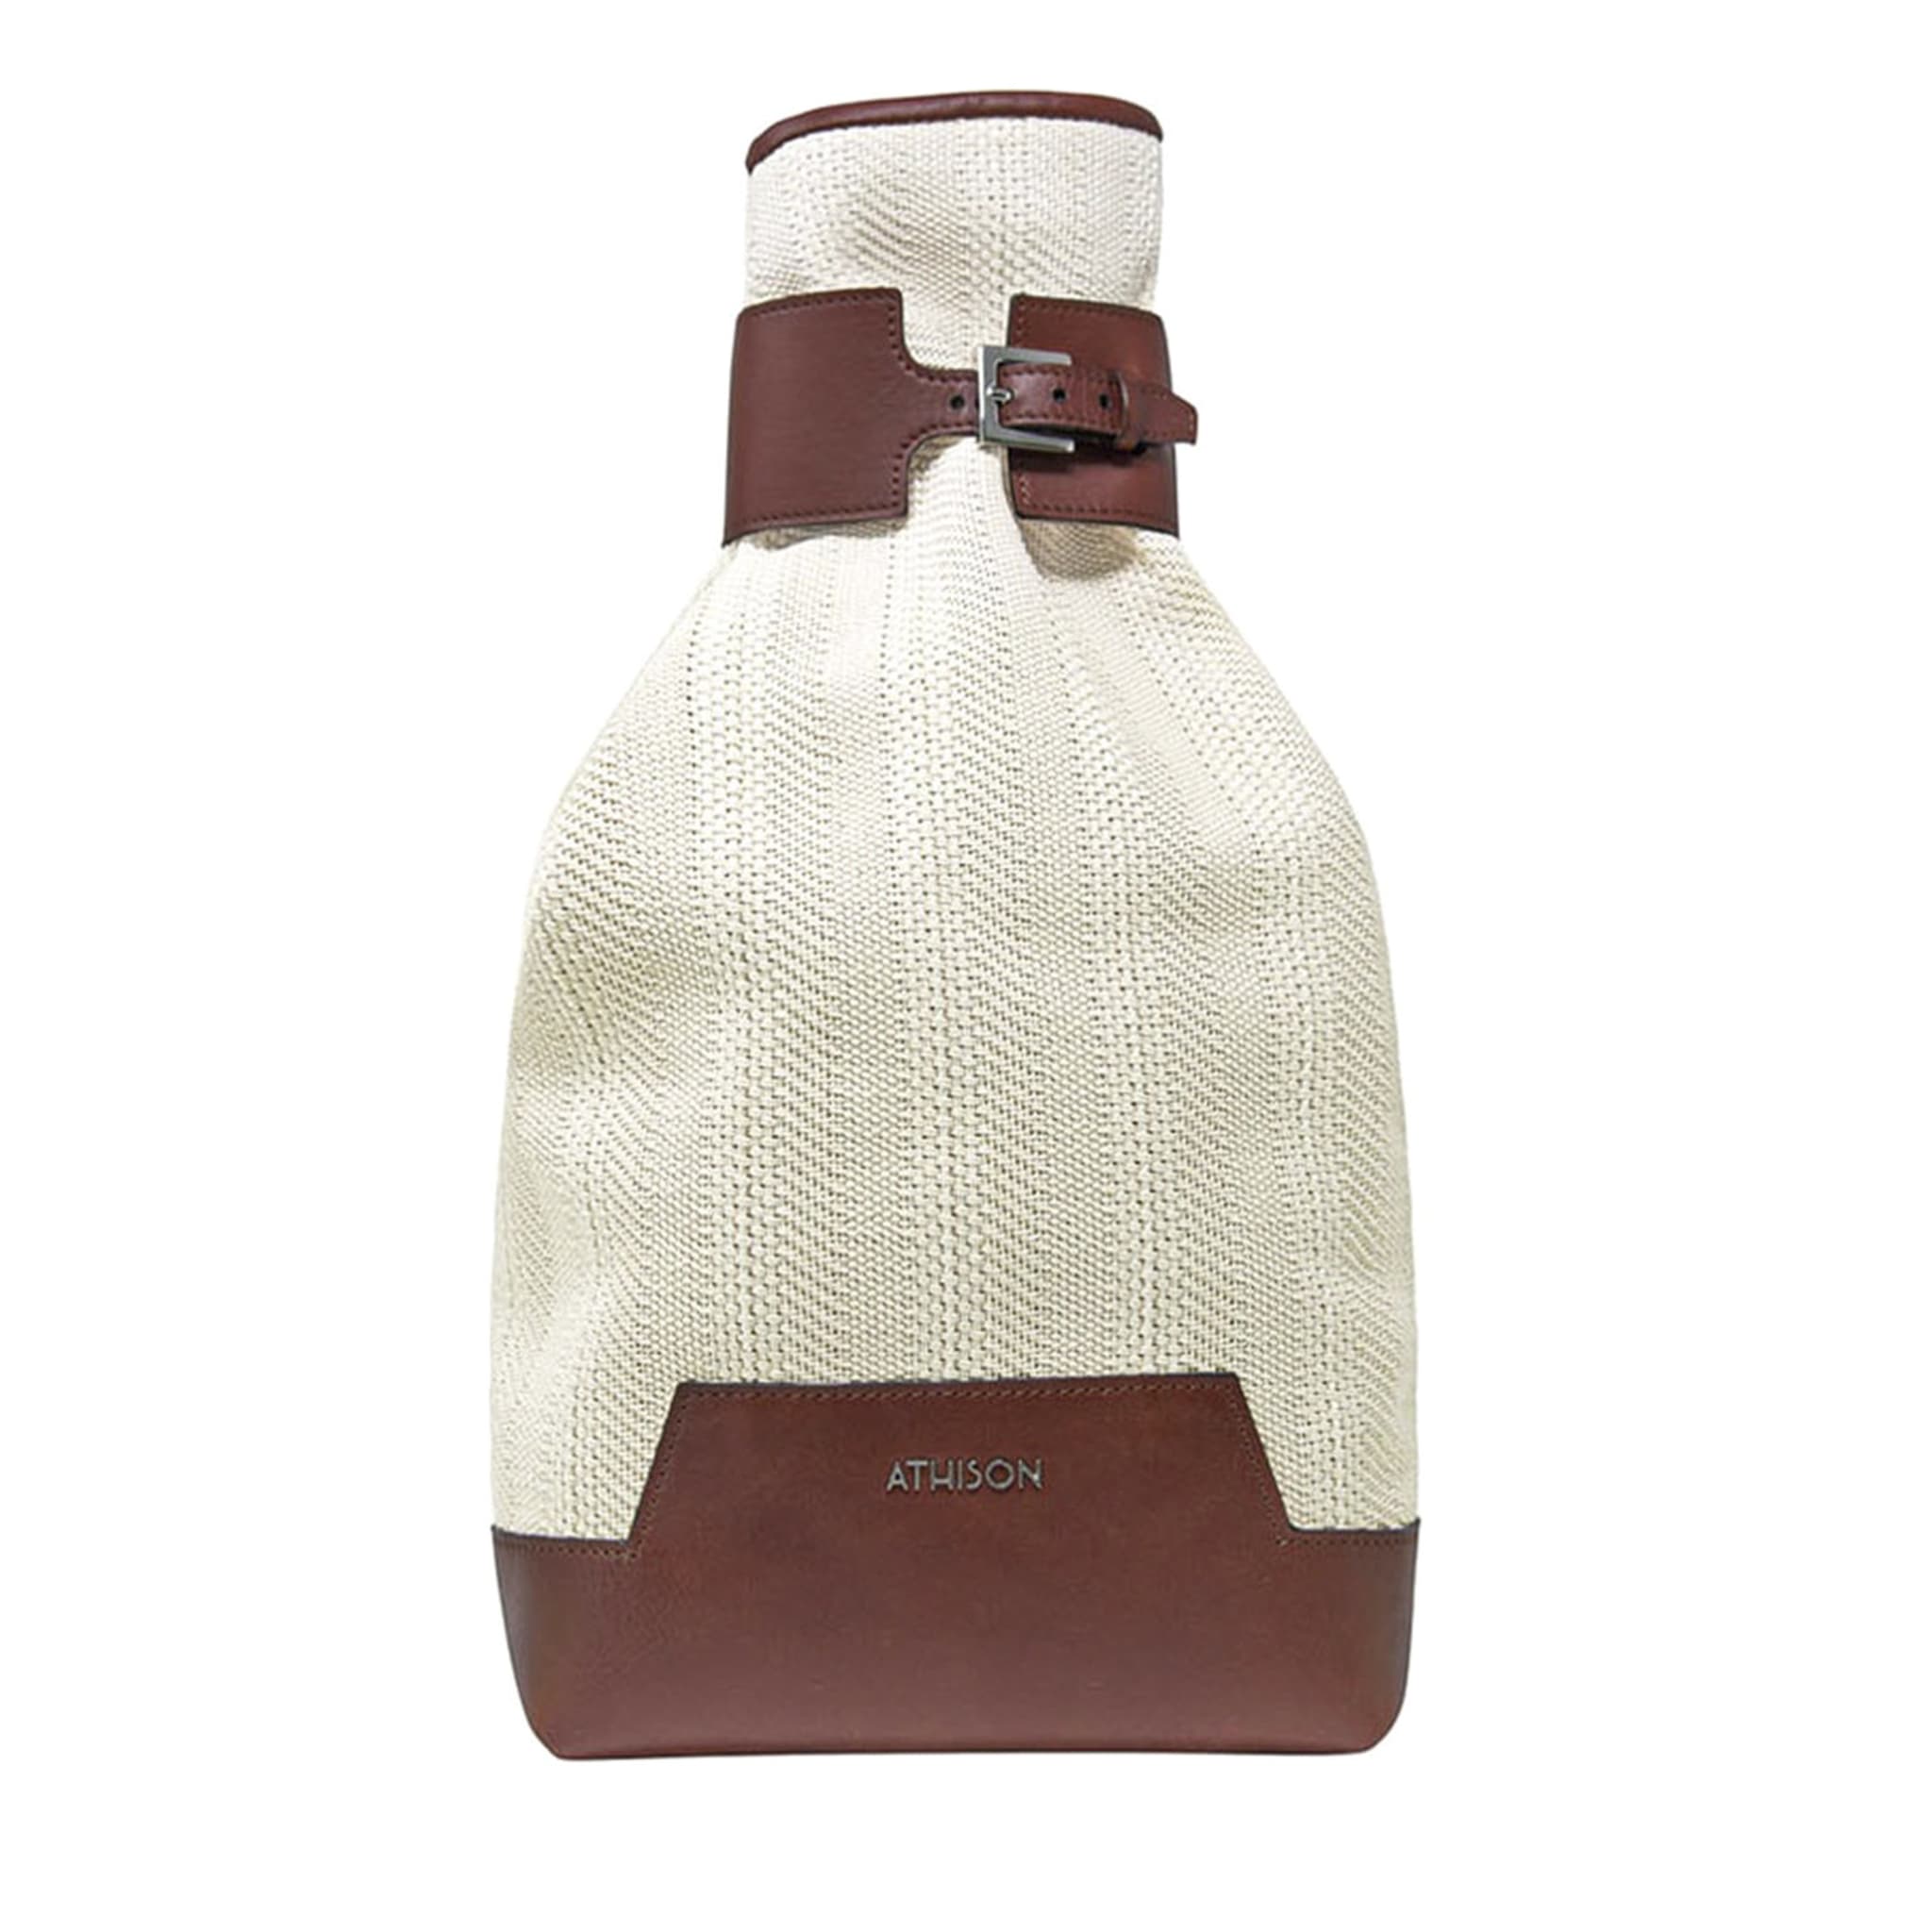 Leather and Braided Cotton Backpack “Veglia” - Beige and Brown - Main view